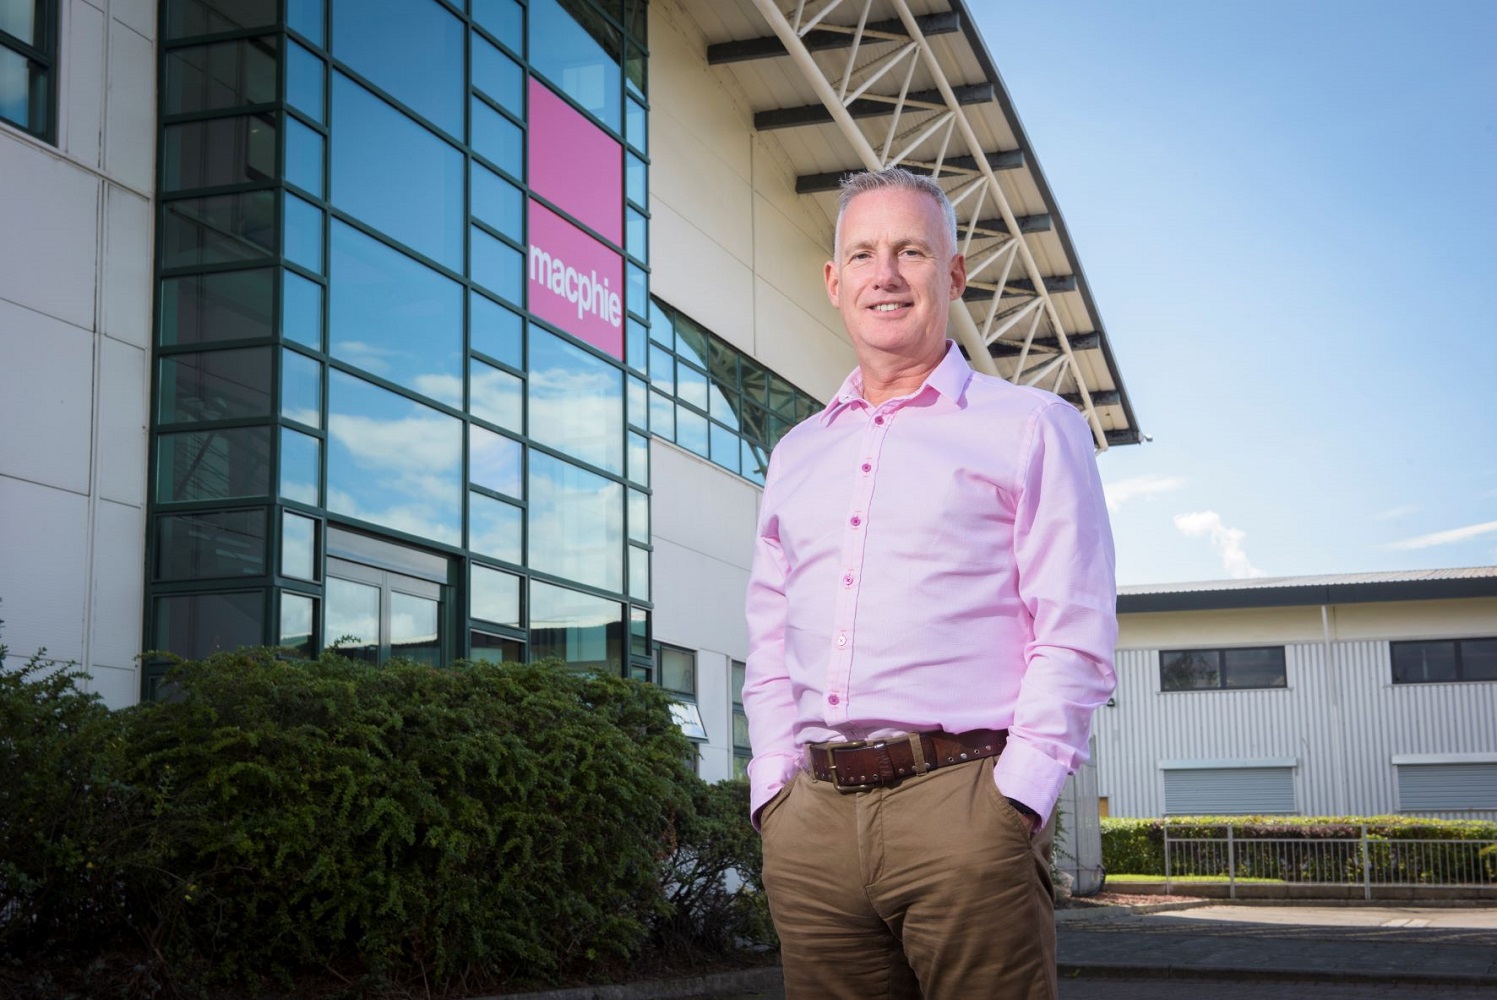 Macphie boosts jobs market with 20 new roles